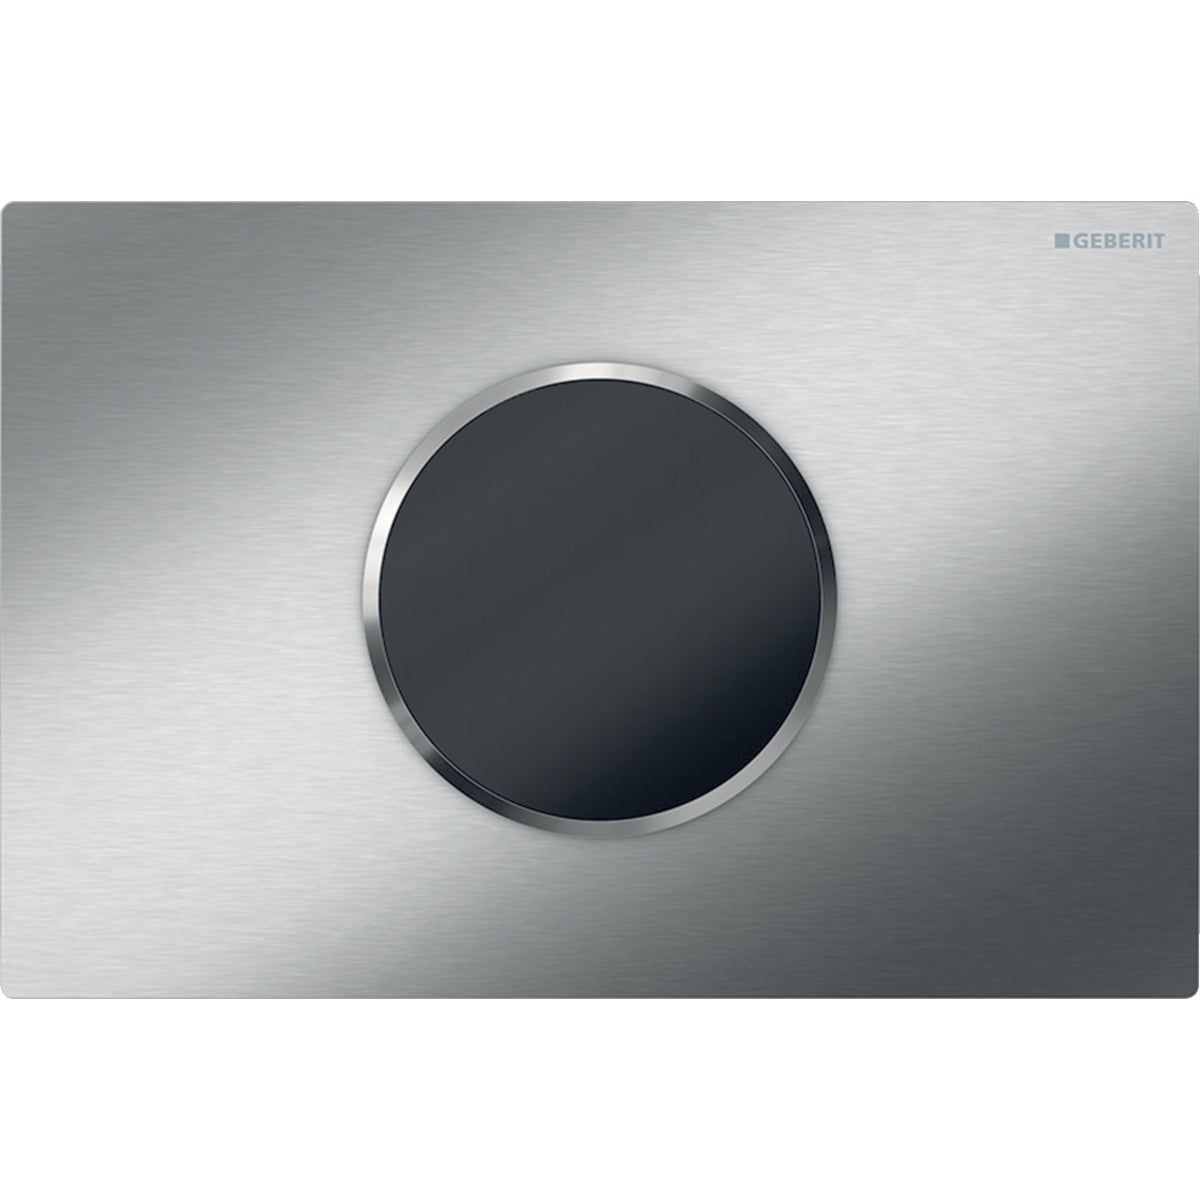 Geberit Toilet Flush Control with Electronic Flush Actuation, Battery Operation, Dual Flush and Sigma 10 Actuator Plate Automatic/Touchless